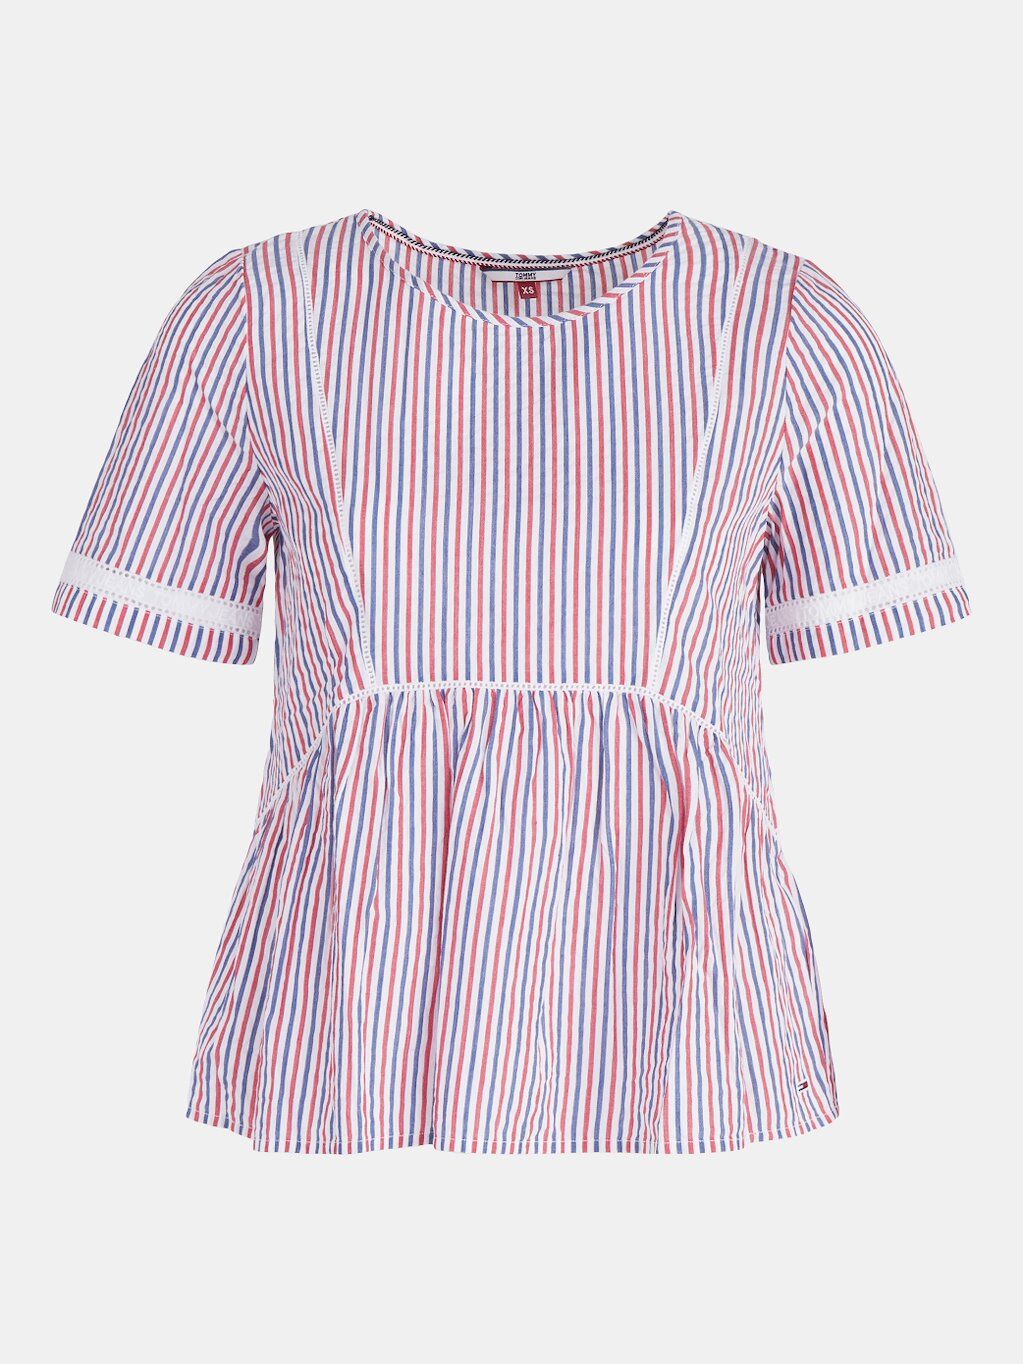 Tommy Jeans Blusas Tommy Jeans Striped Shortsleeve Top - Varias Cores - Mulher